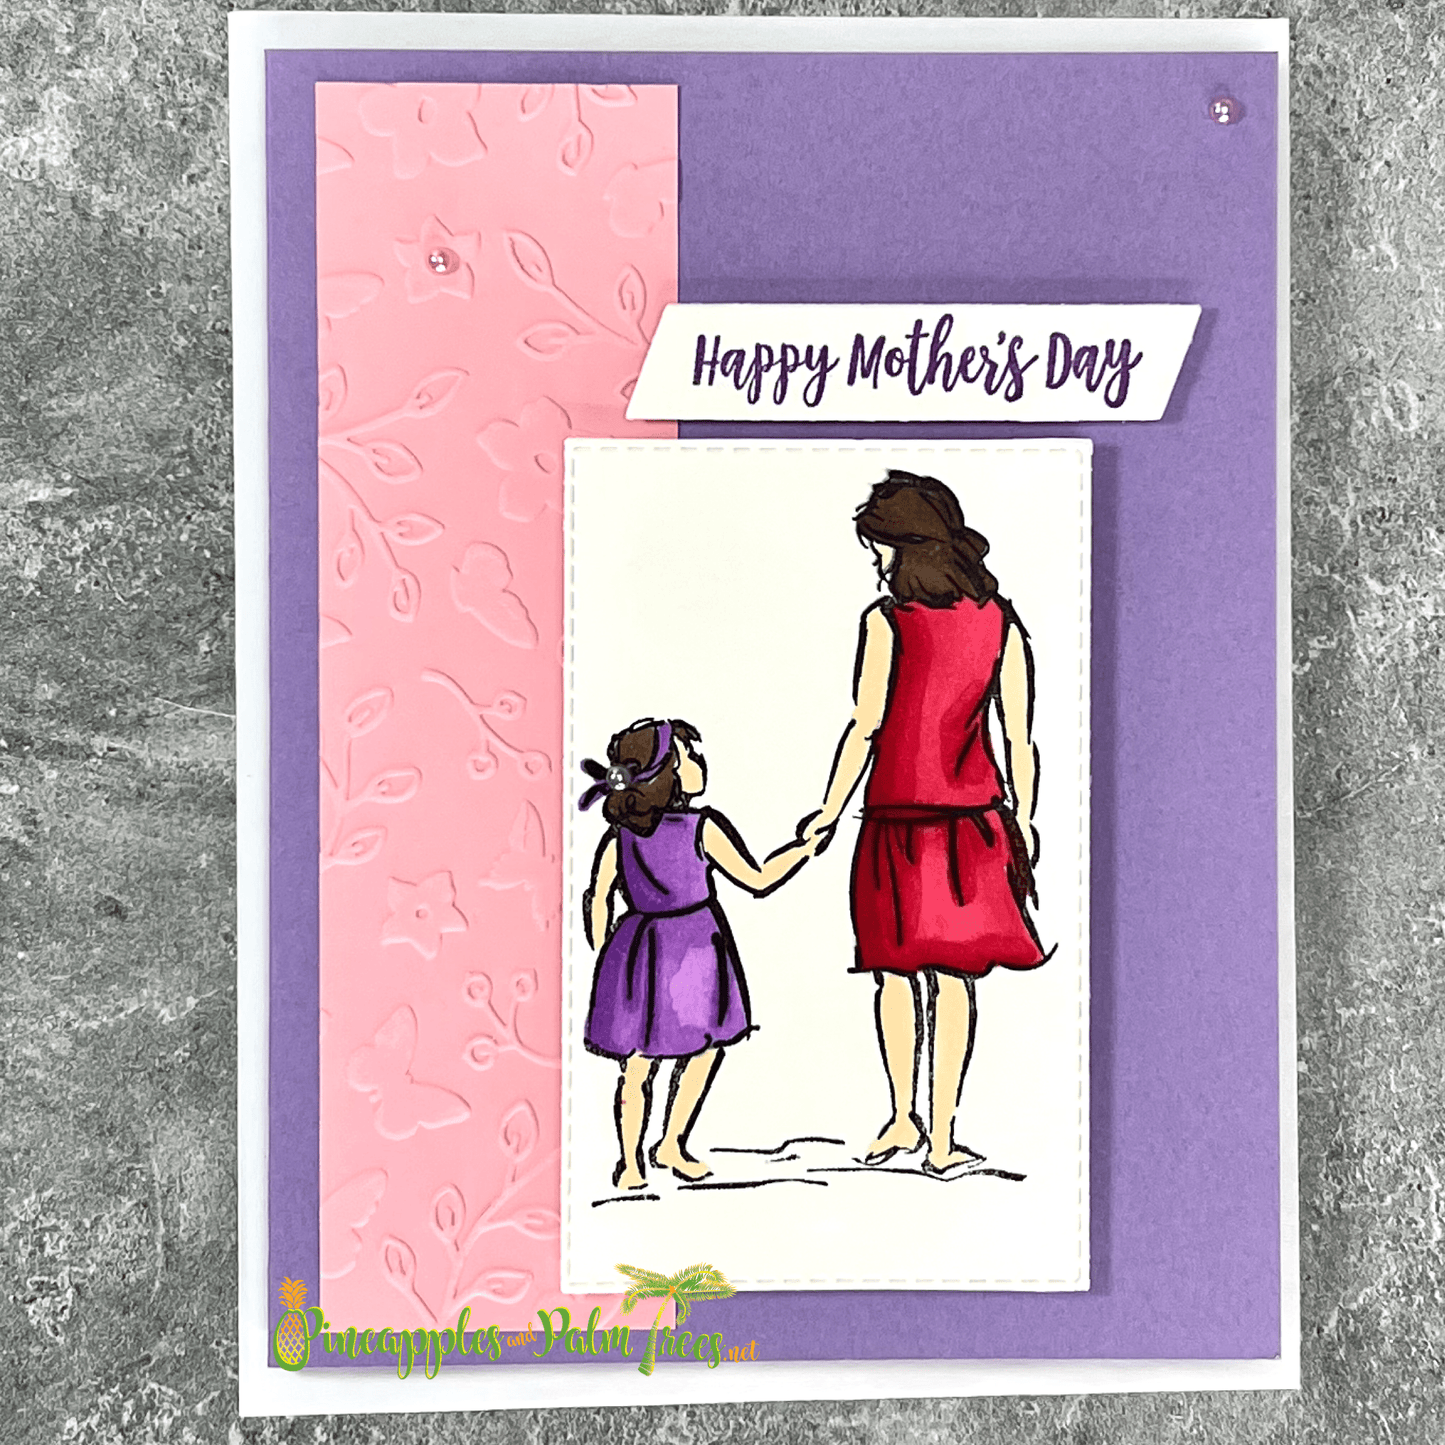 Greeting Card: Happy Mother's Day - purple